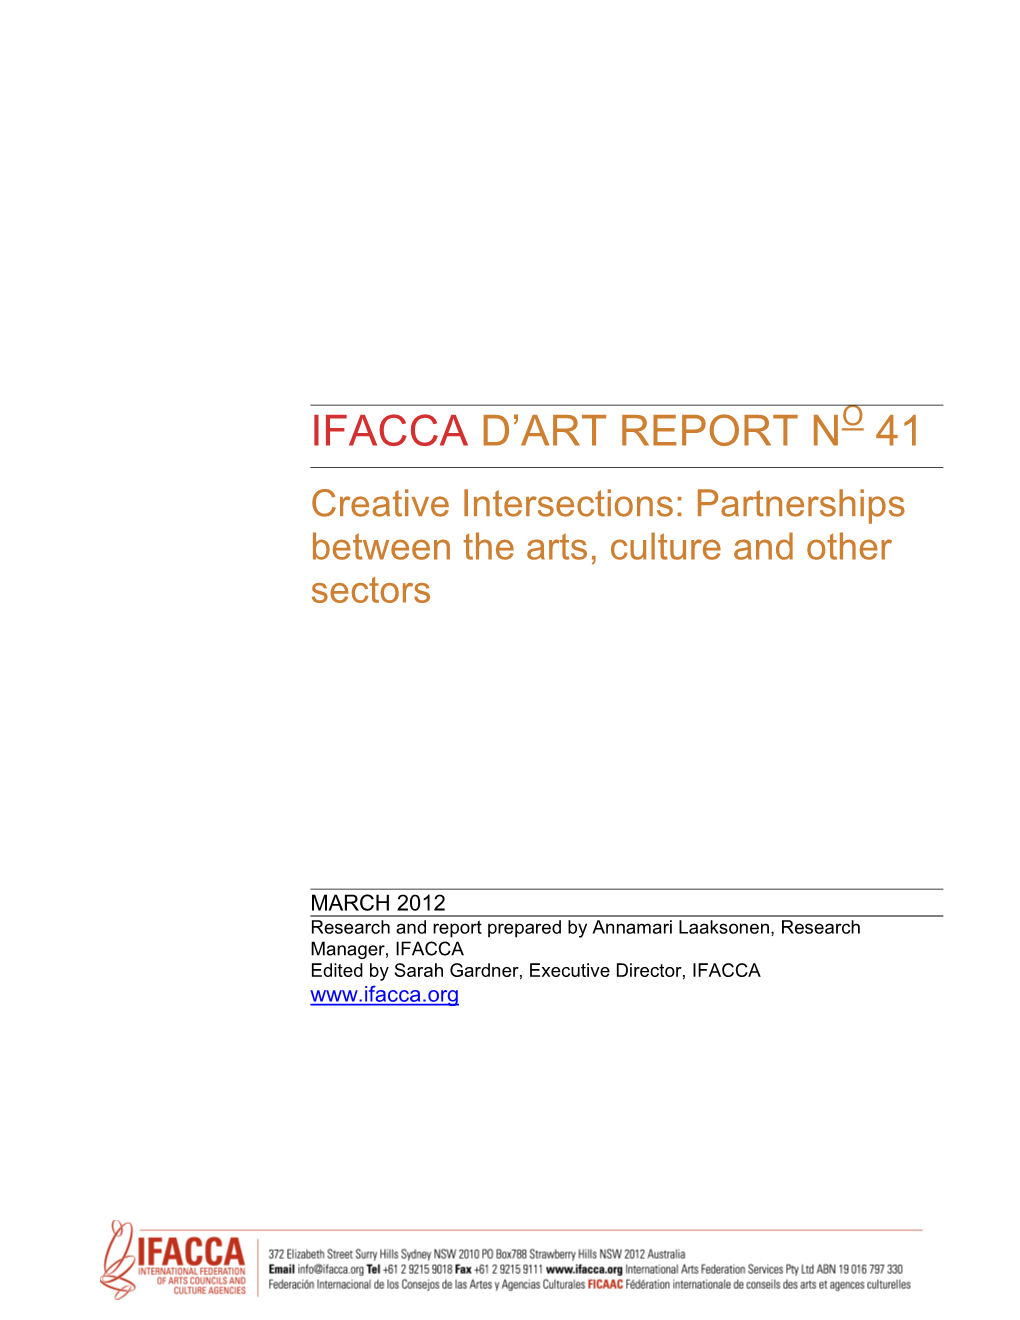 Creative Intersections: Partnerships Between the Arts, Culture and Other Sectors